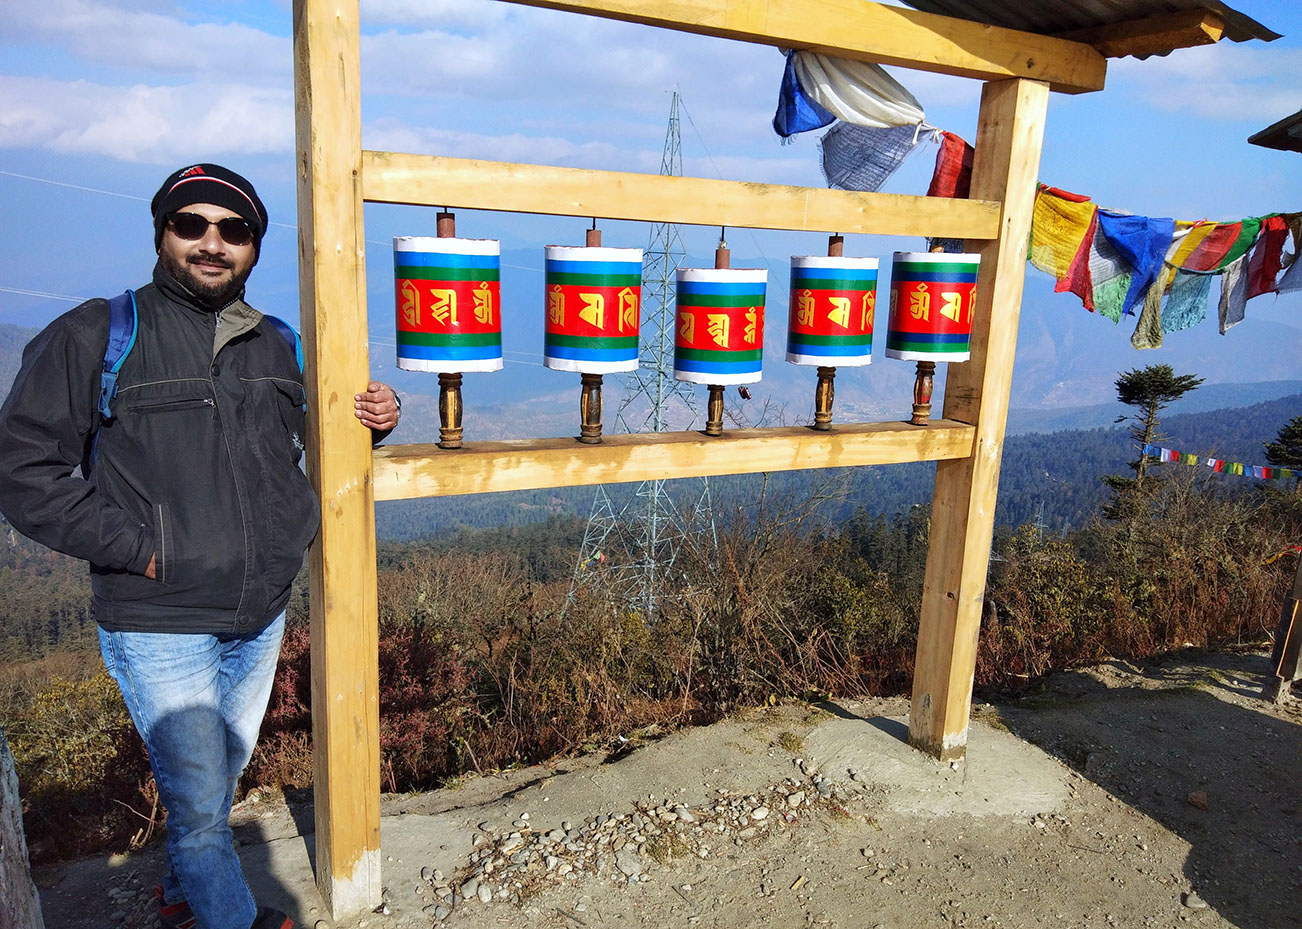 Spinning the prayer wheels as per Buddhist tradition at Chele La pass